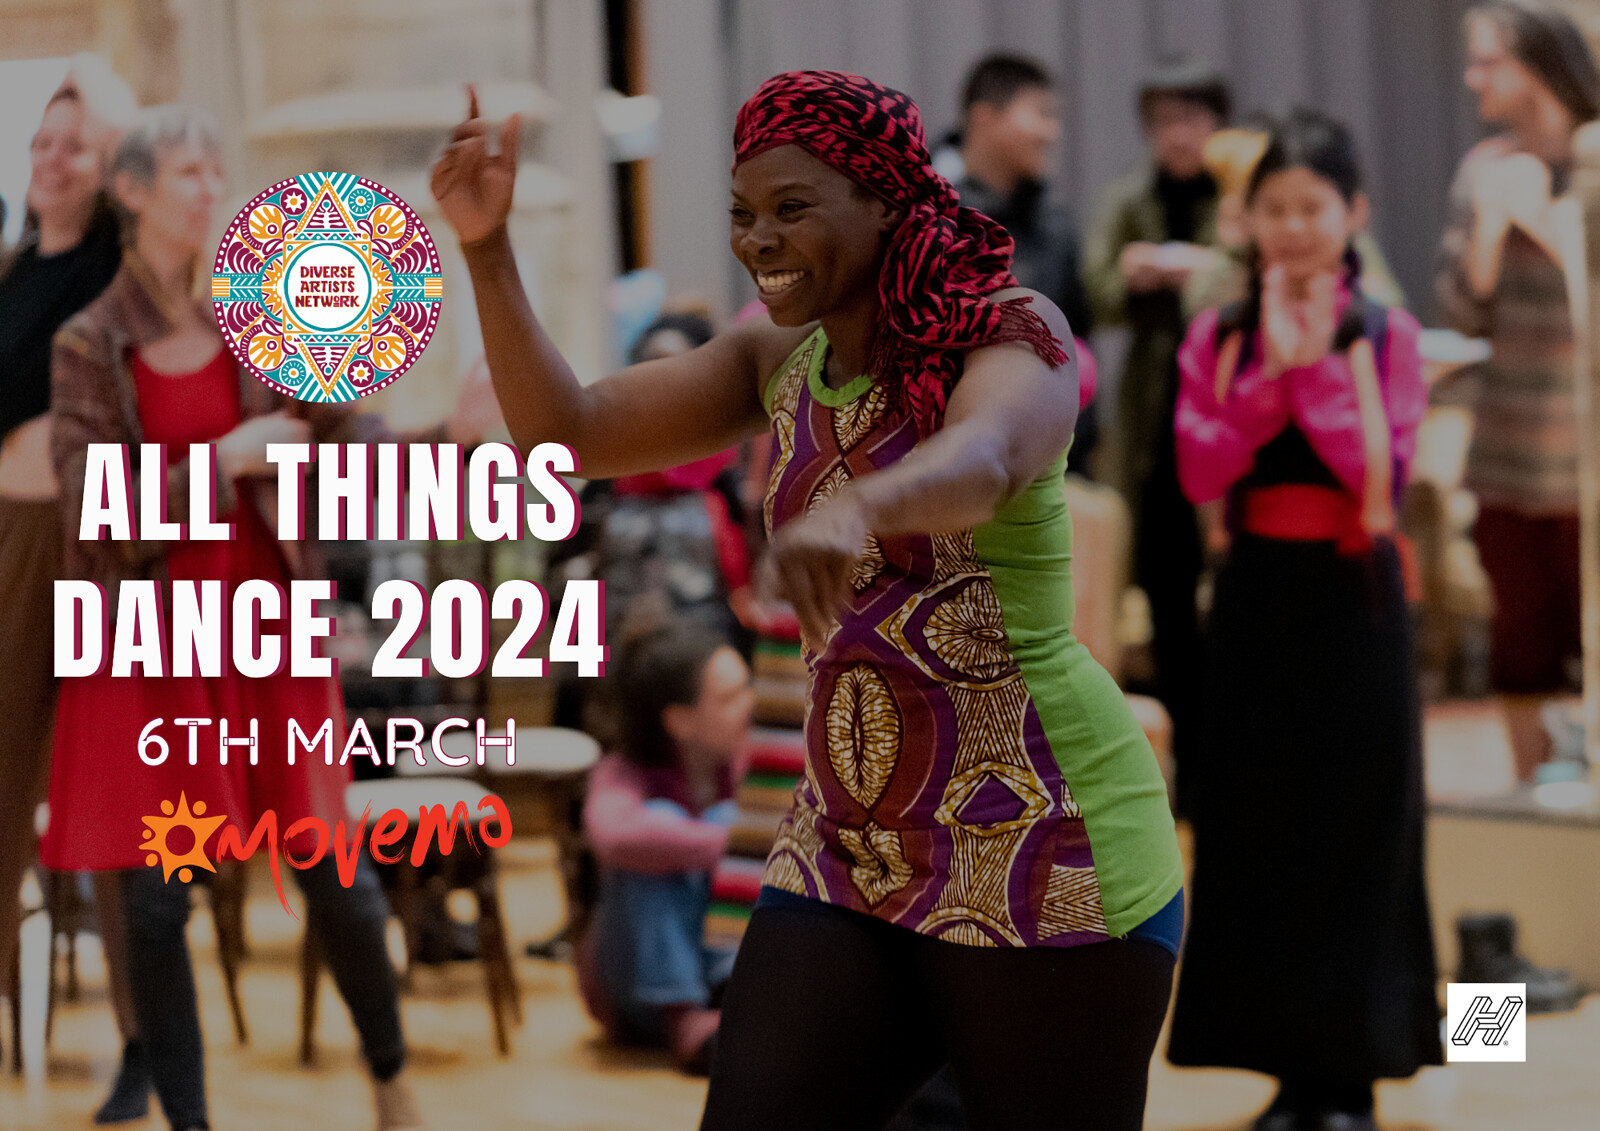 All Things Dance 2024 at The Mount Without